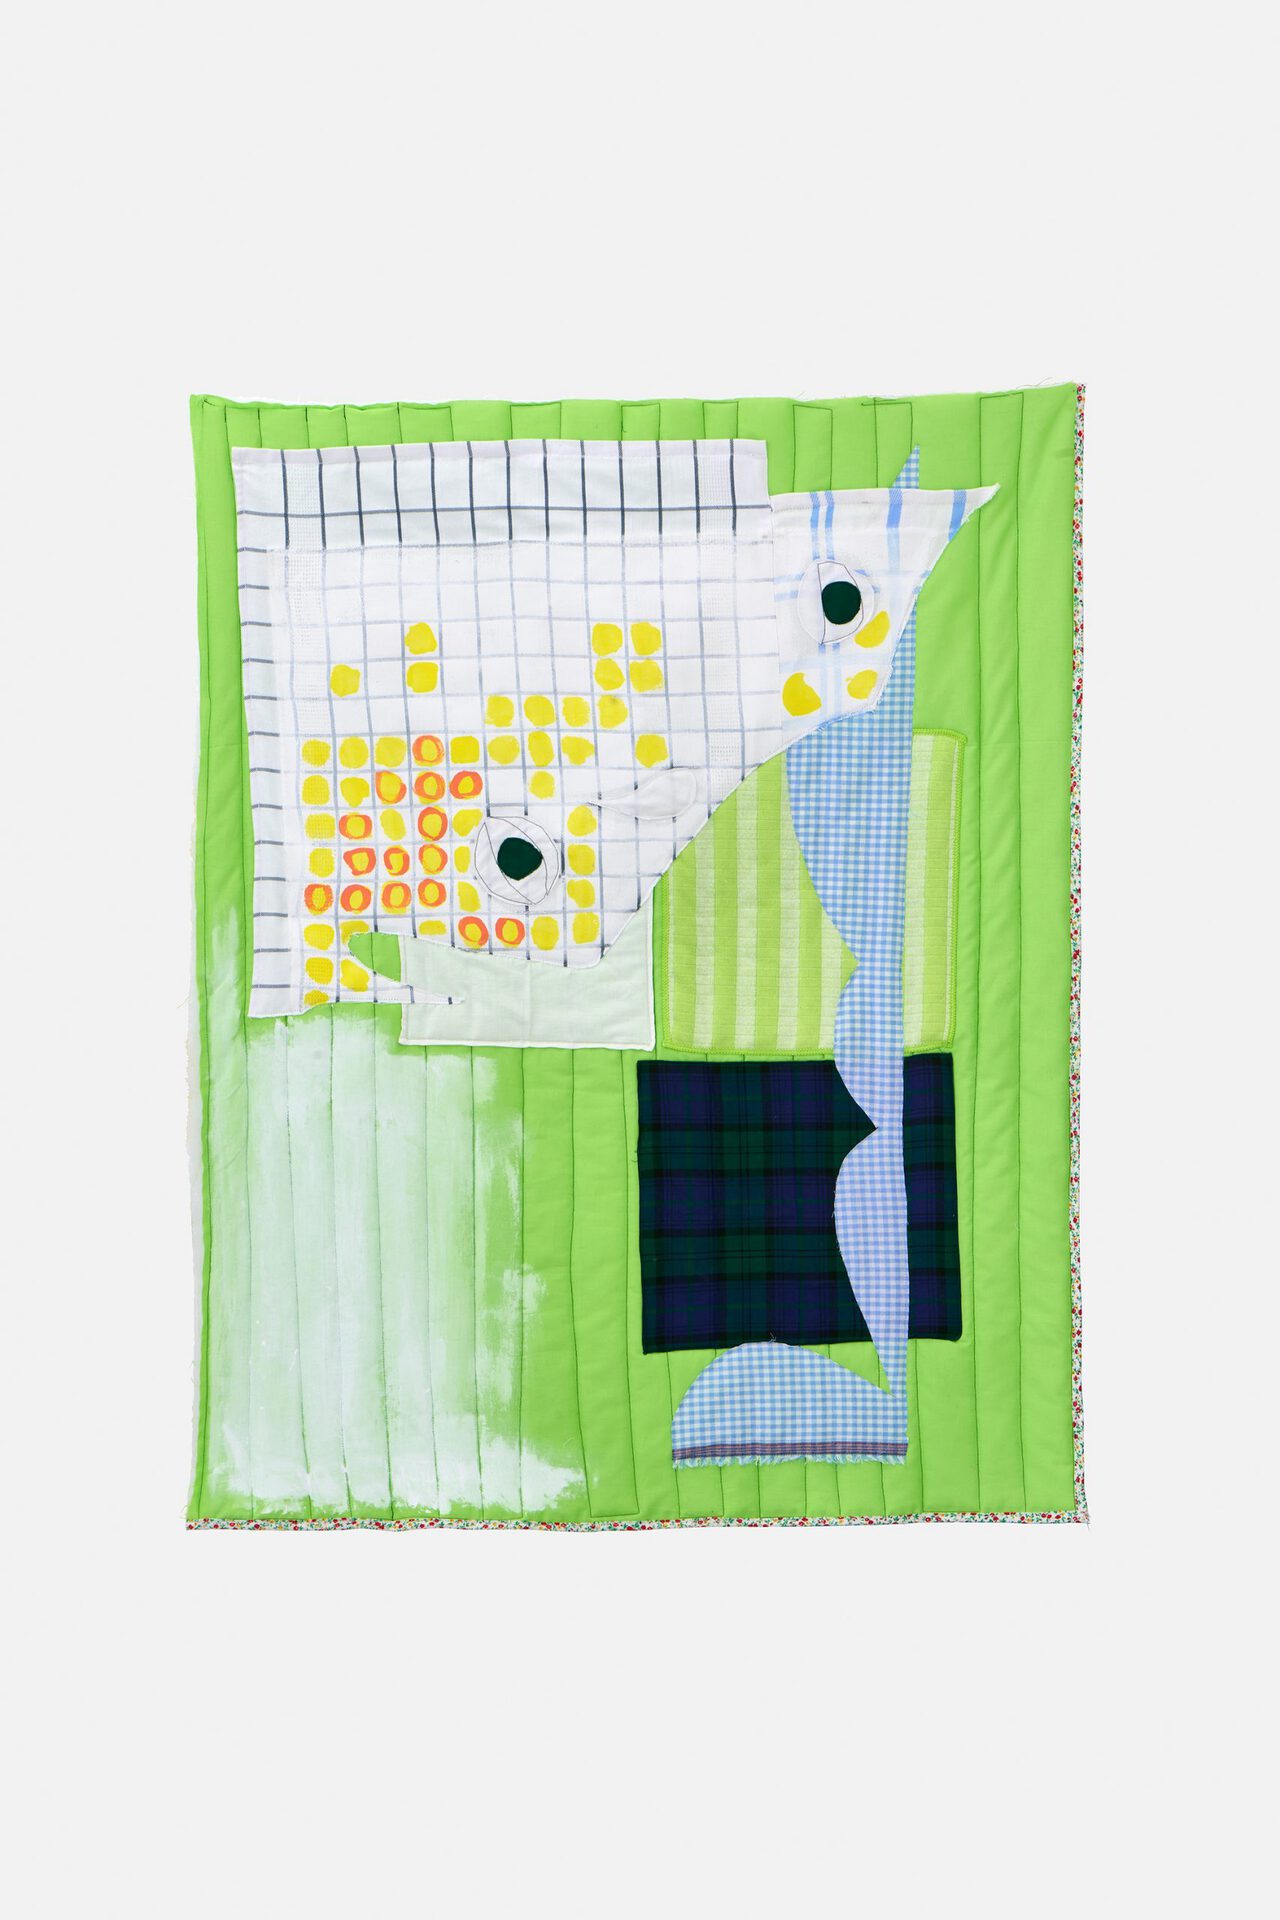 Franca Scholz, home is where the hunt is_2022_cotton textile, acrylic paint, dish towel, cloth handkerchief, quilted_108 x 87cm